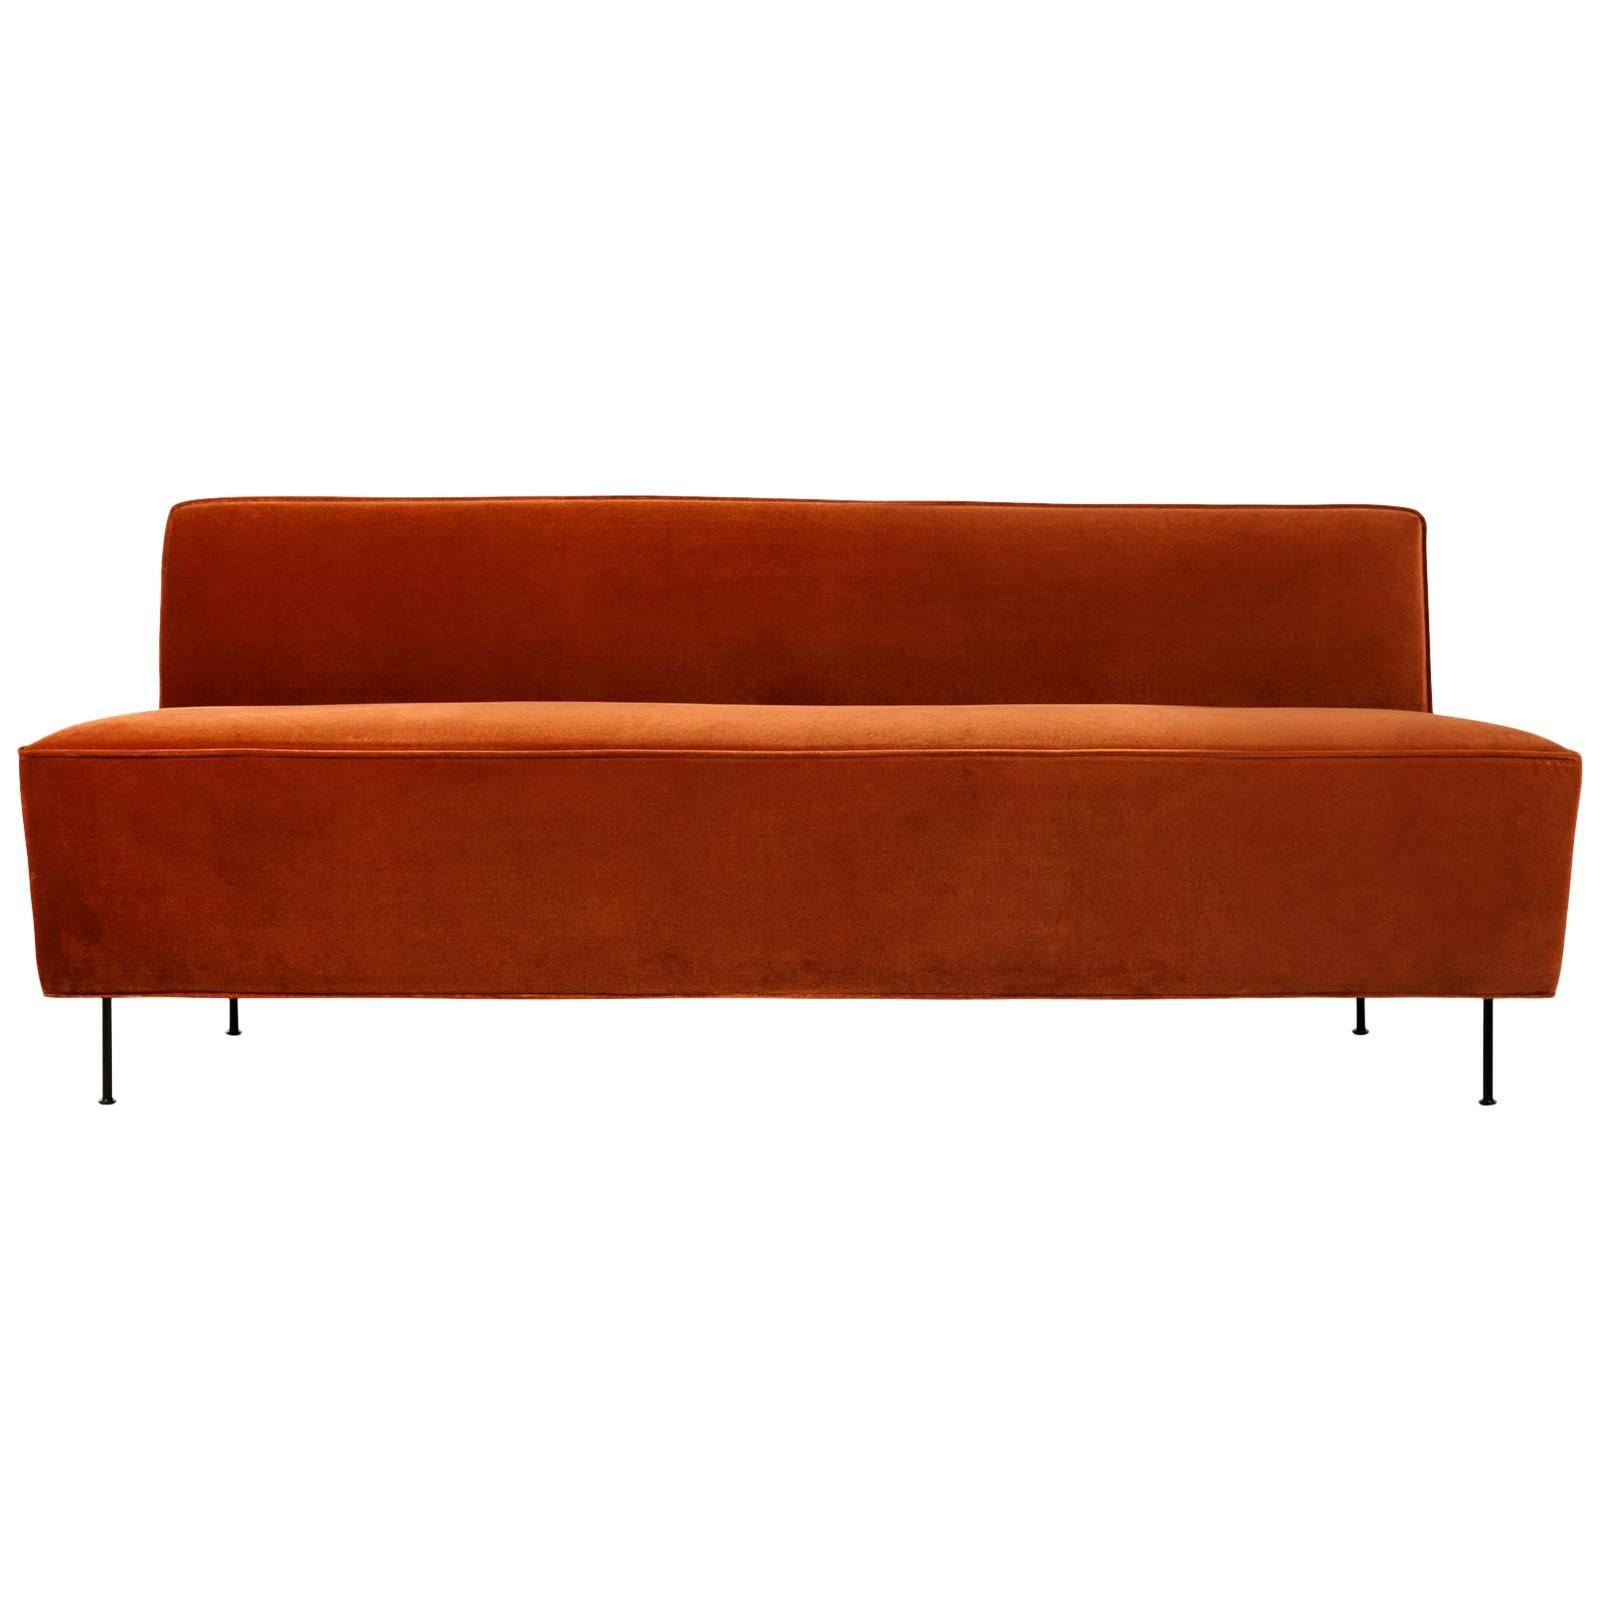 Modern Line Sofa, Dining Height, Medium with Brass Legs For Sale